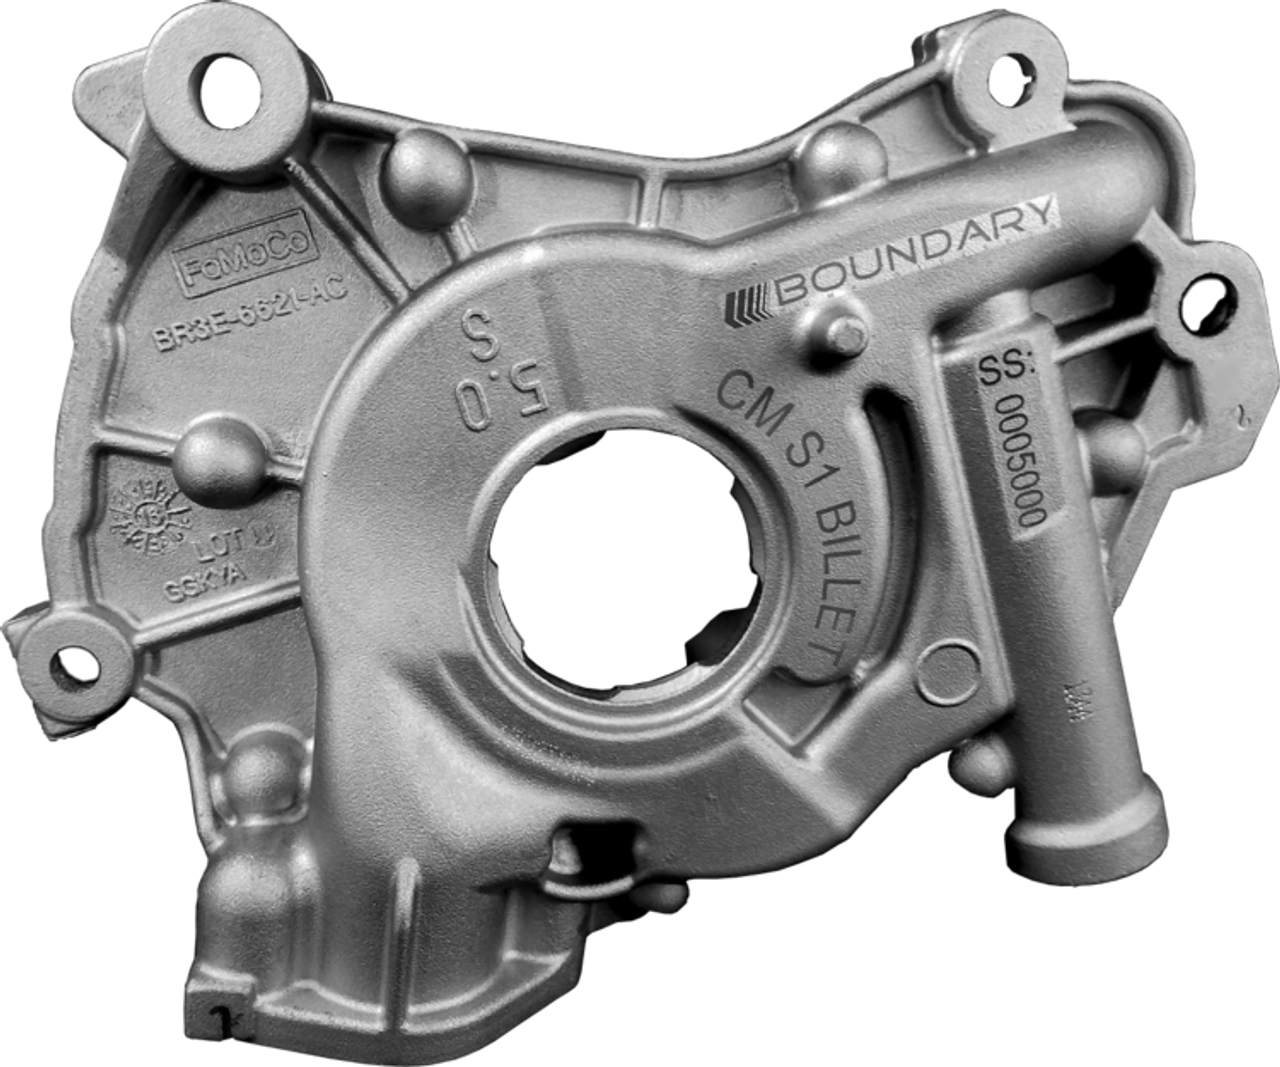 Boundary Assembled Coyote Oil Pump for 2011-2017 Mustang & F-150 (BOUNDARY-CM-S1)